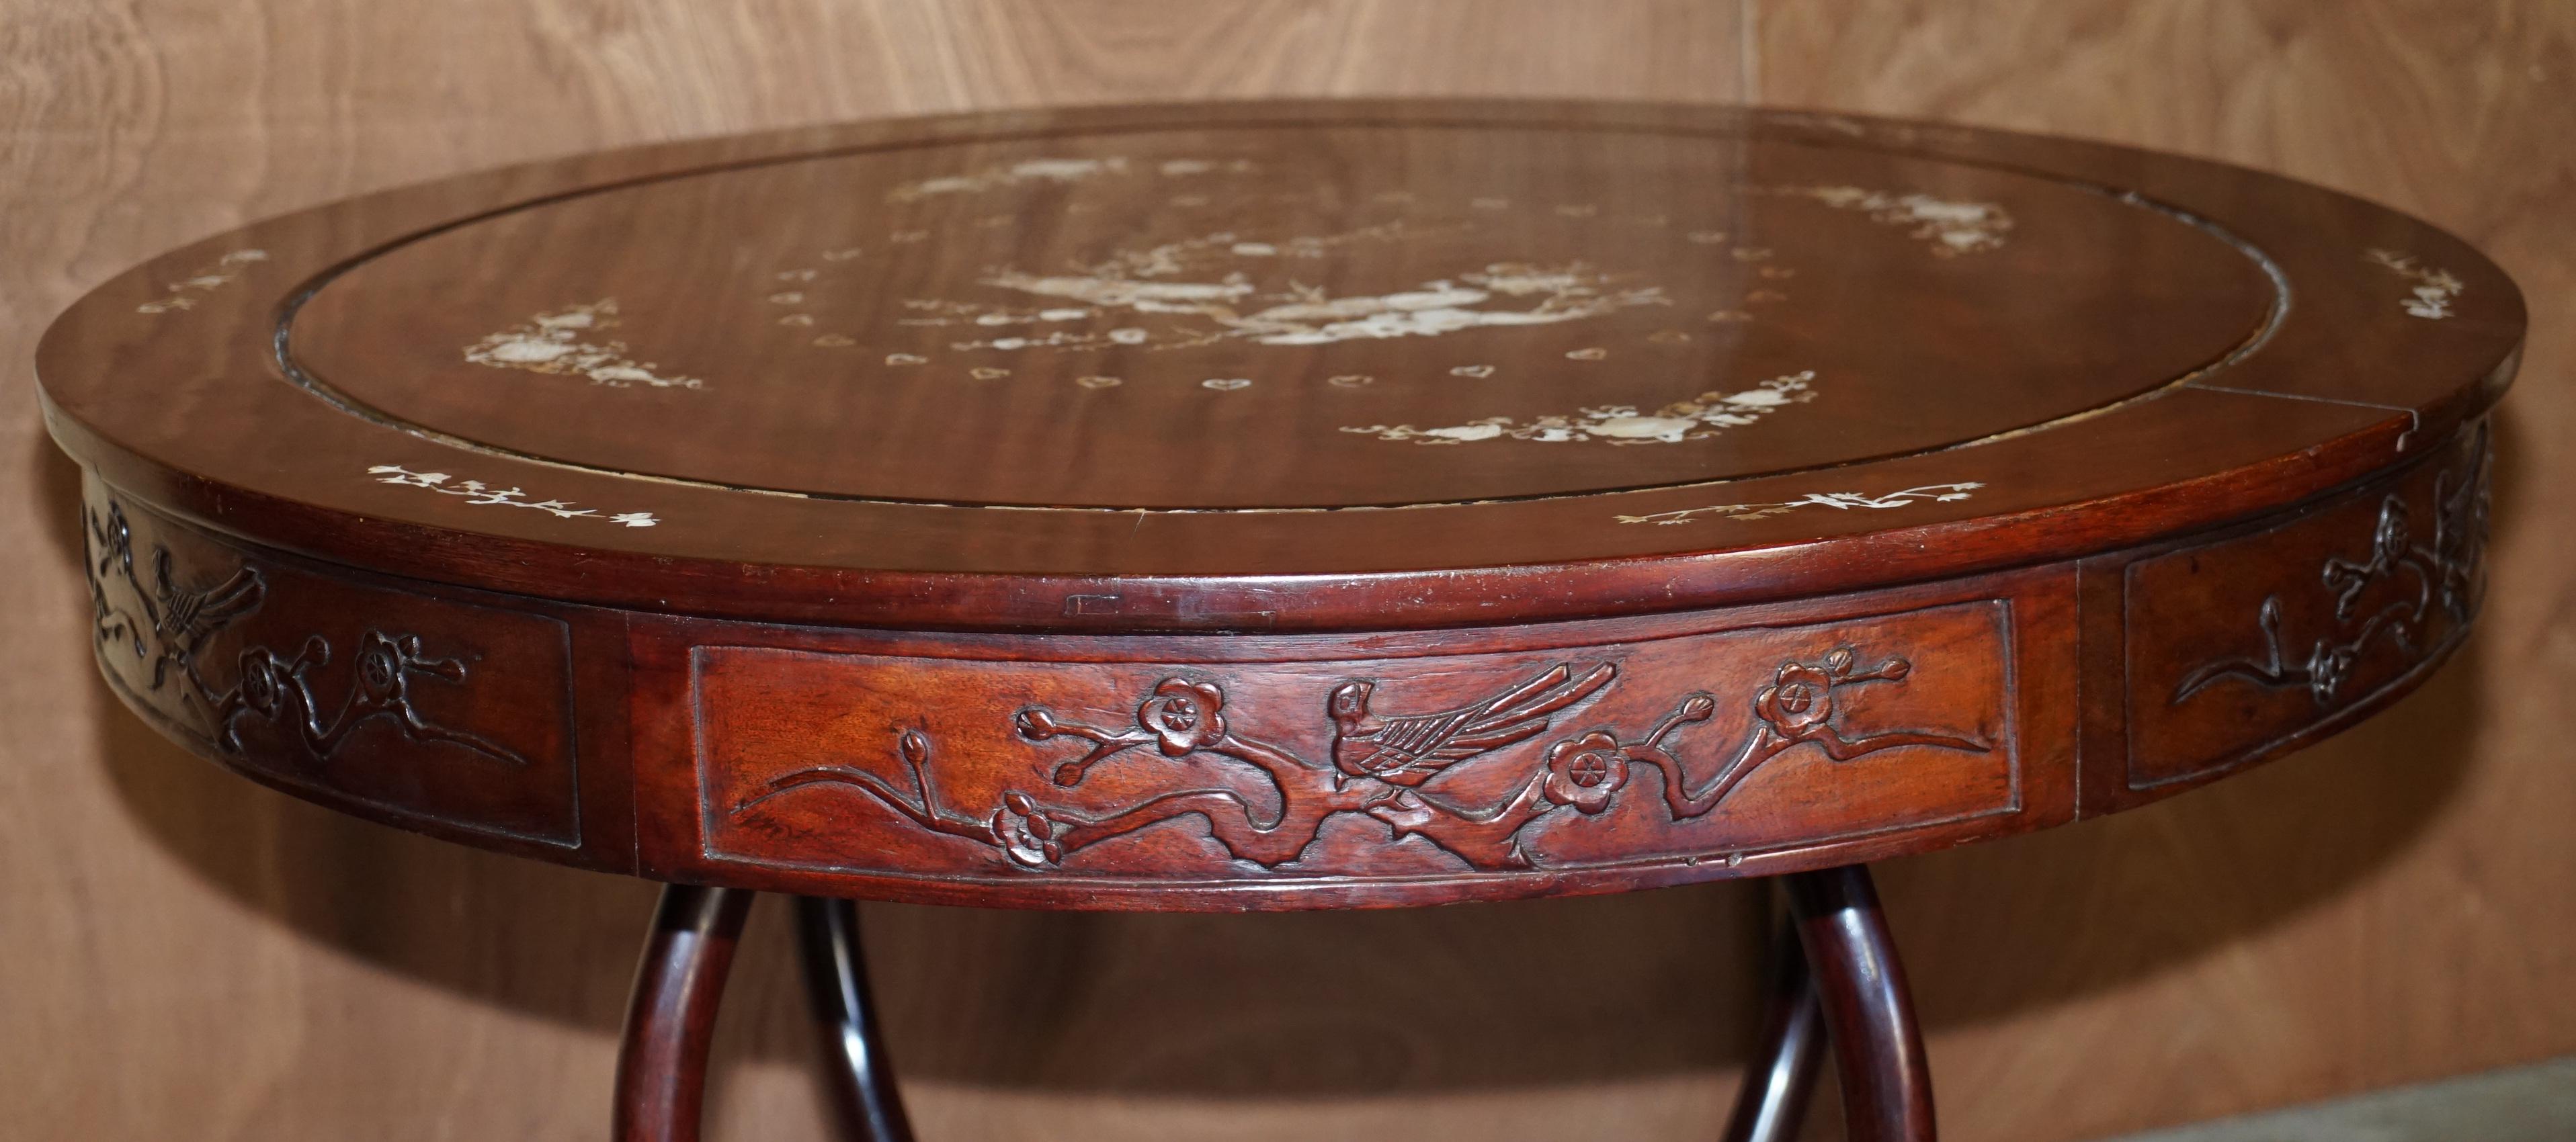 Chinese Republic Circa 1930's Hardwood Mother of Pearl Inlaid Table & Stools For Sale 3